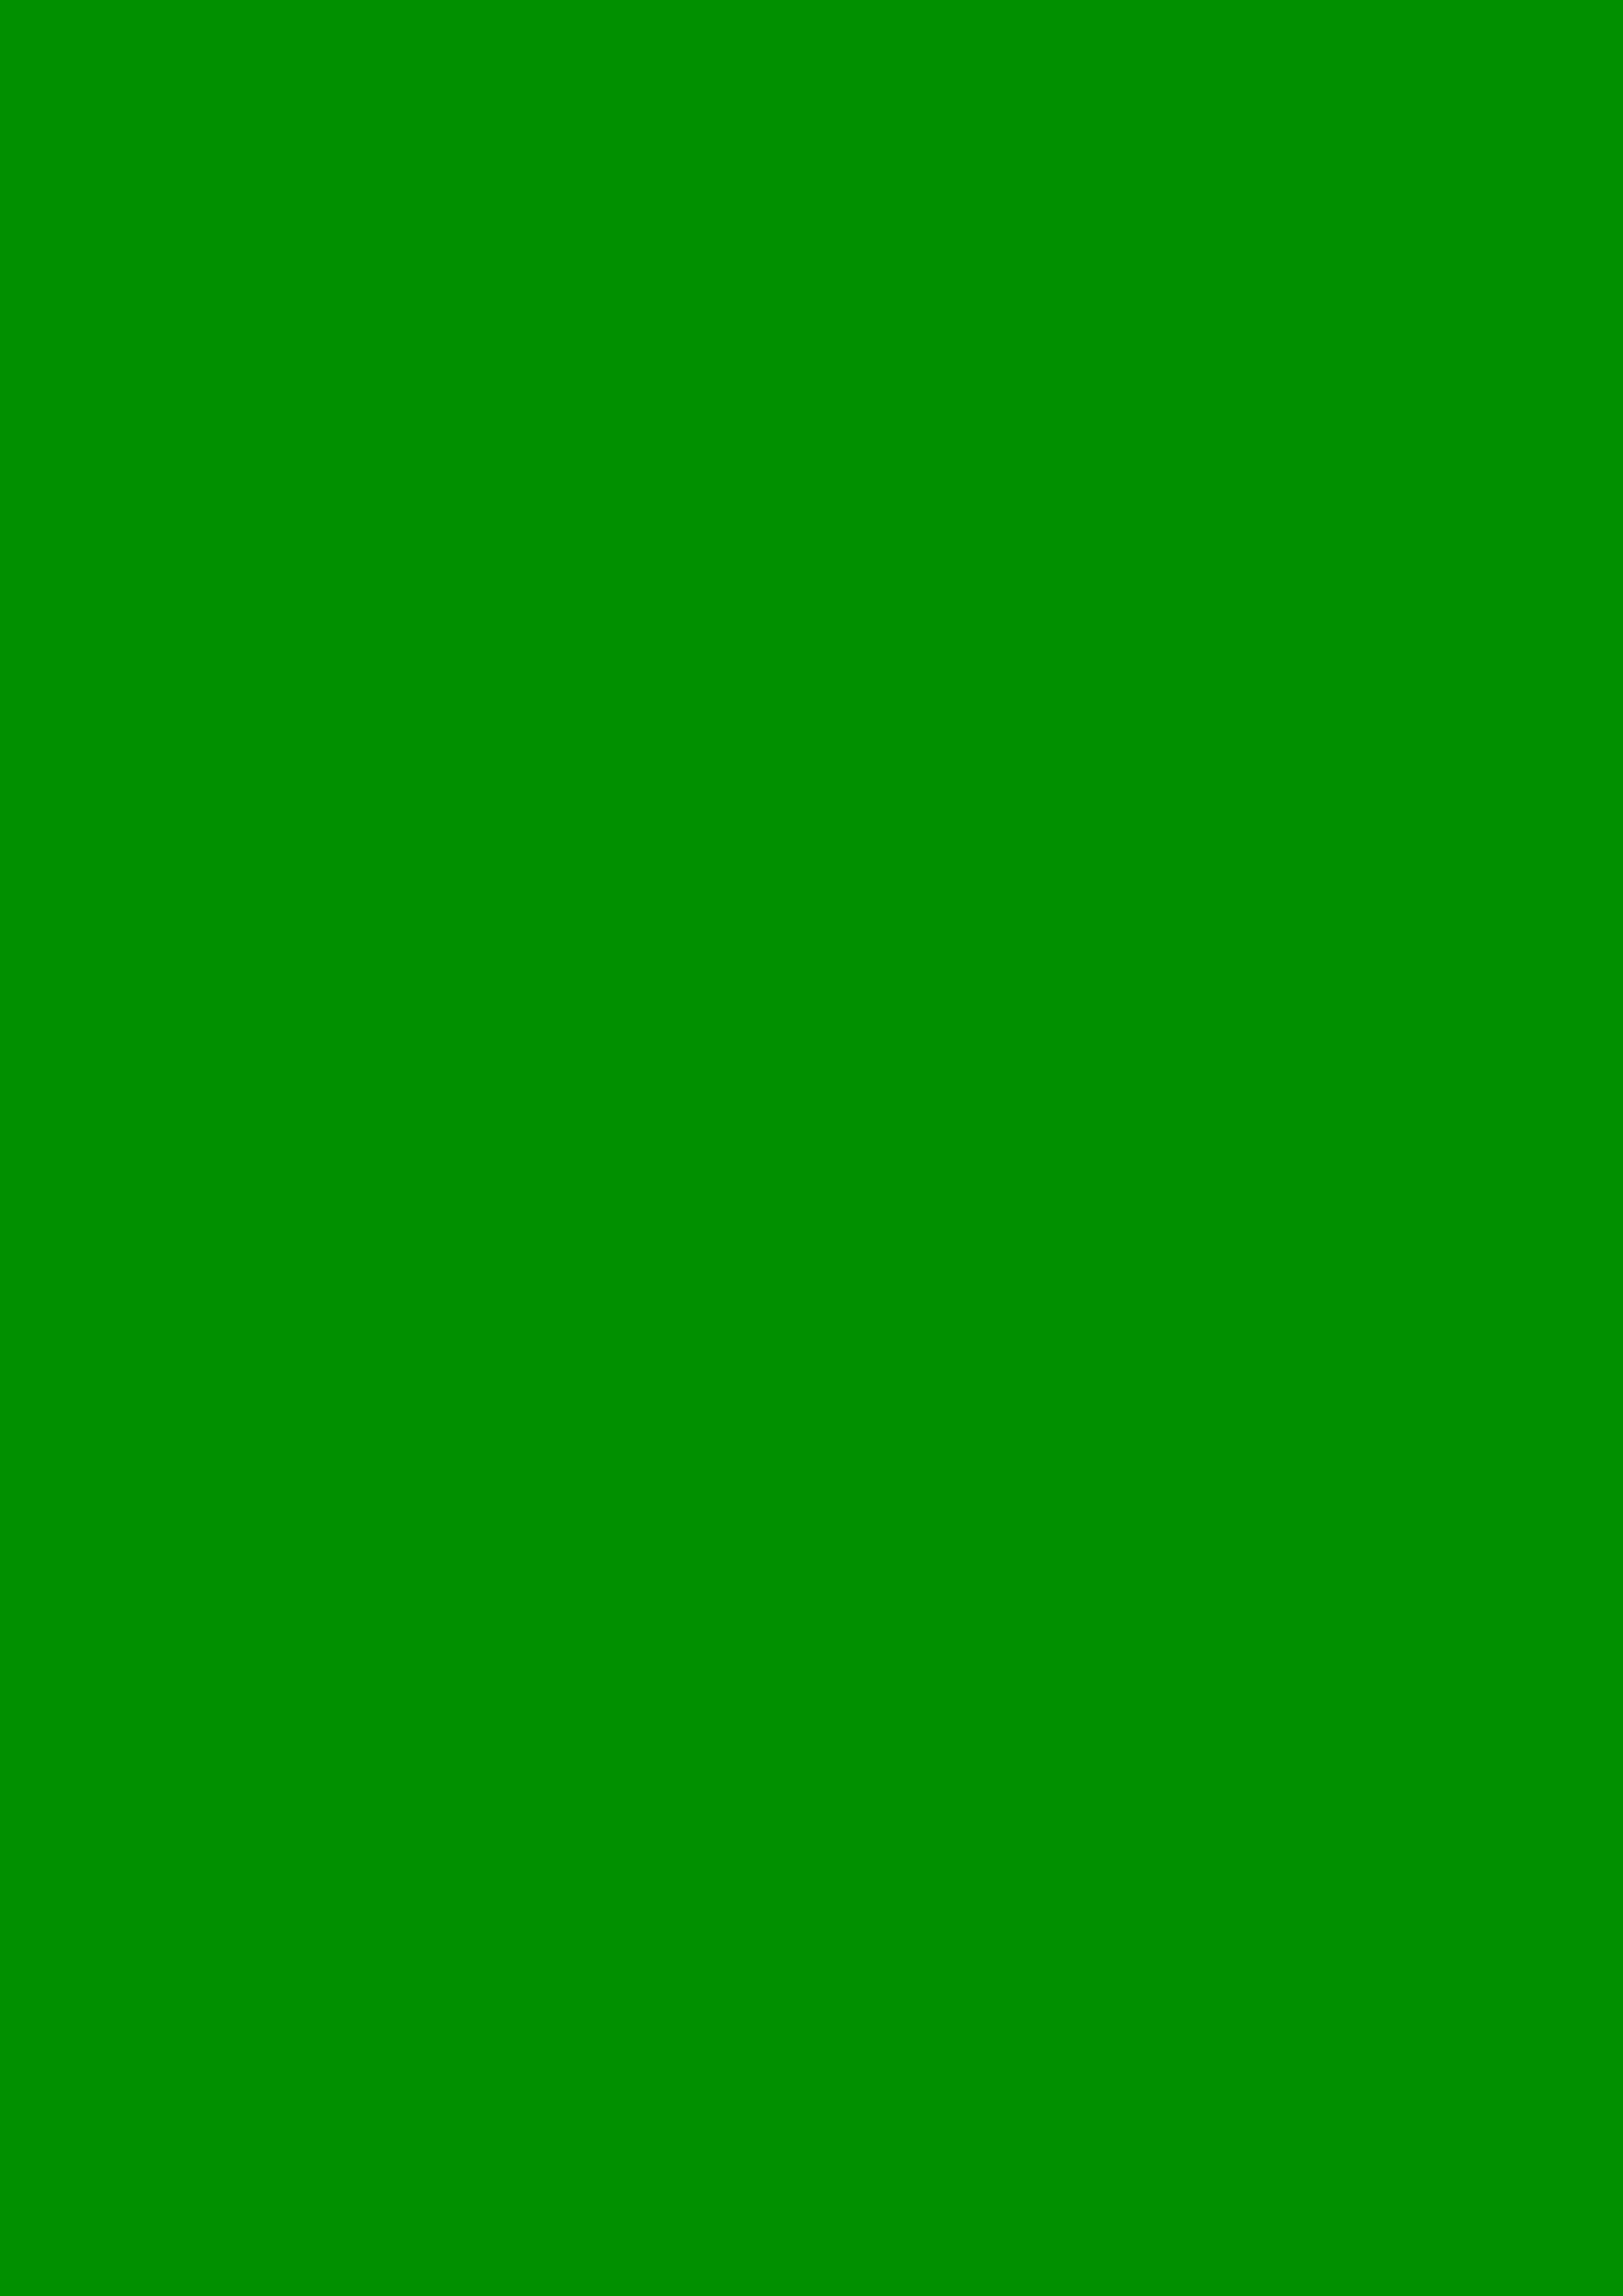 2480x3508 Islamic Green Solid Color Background